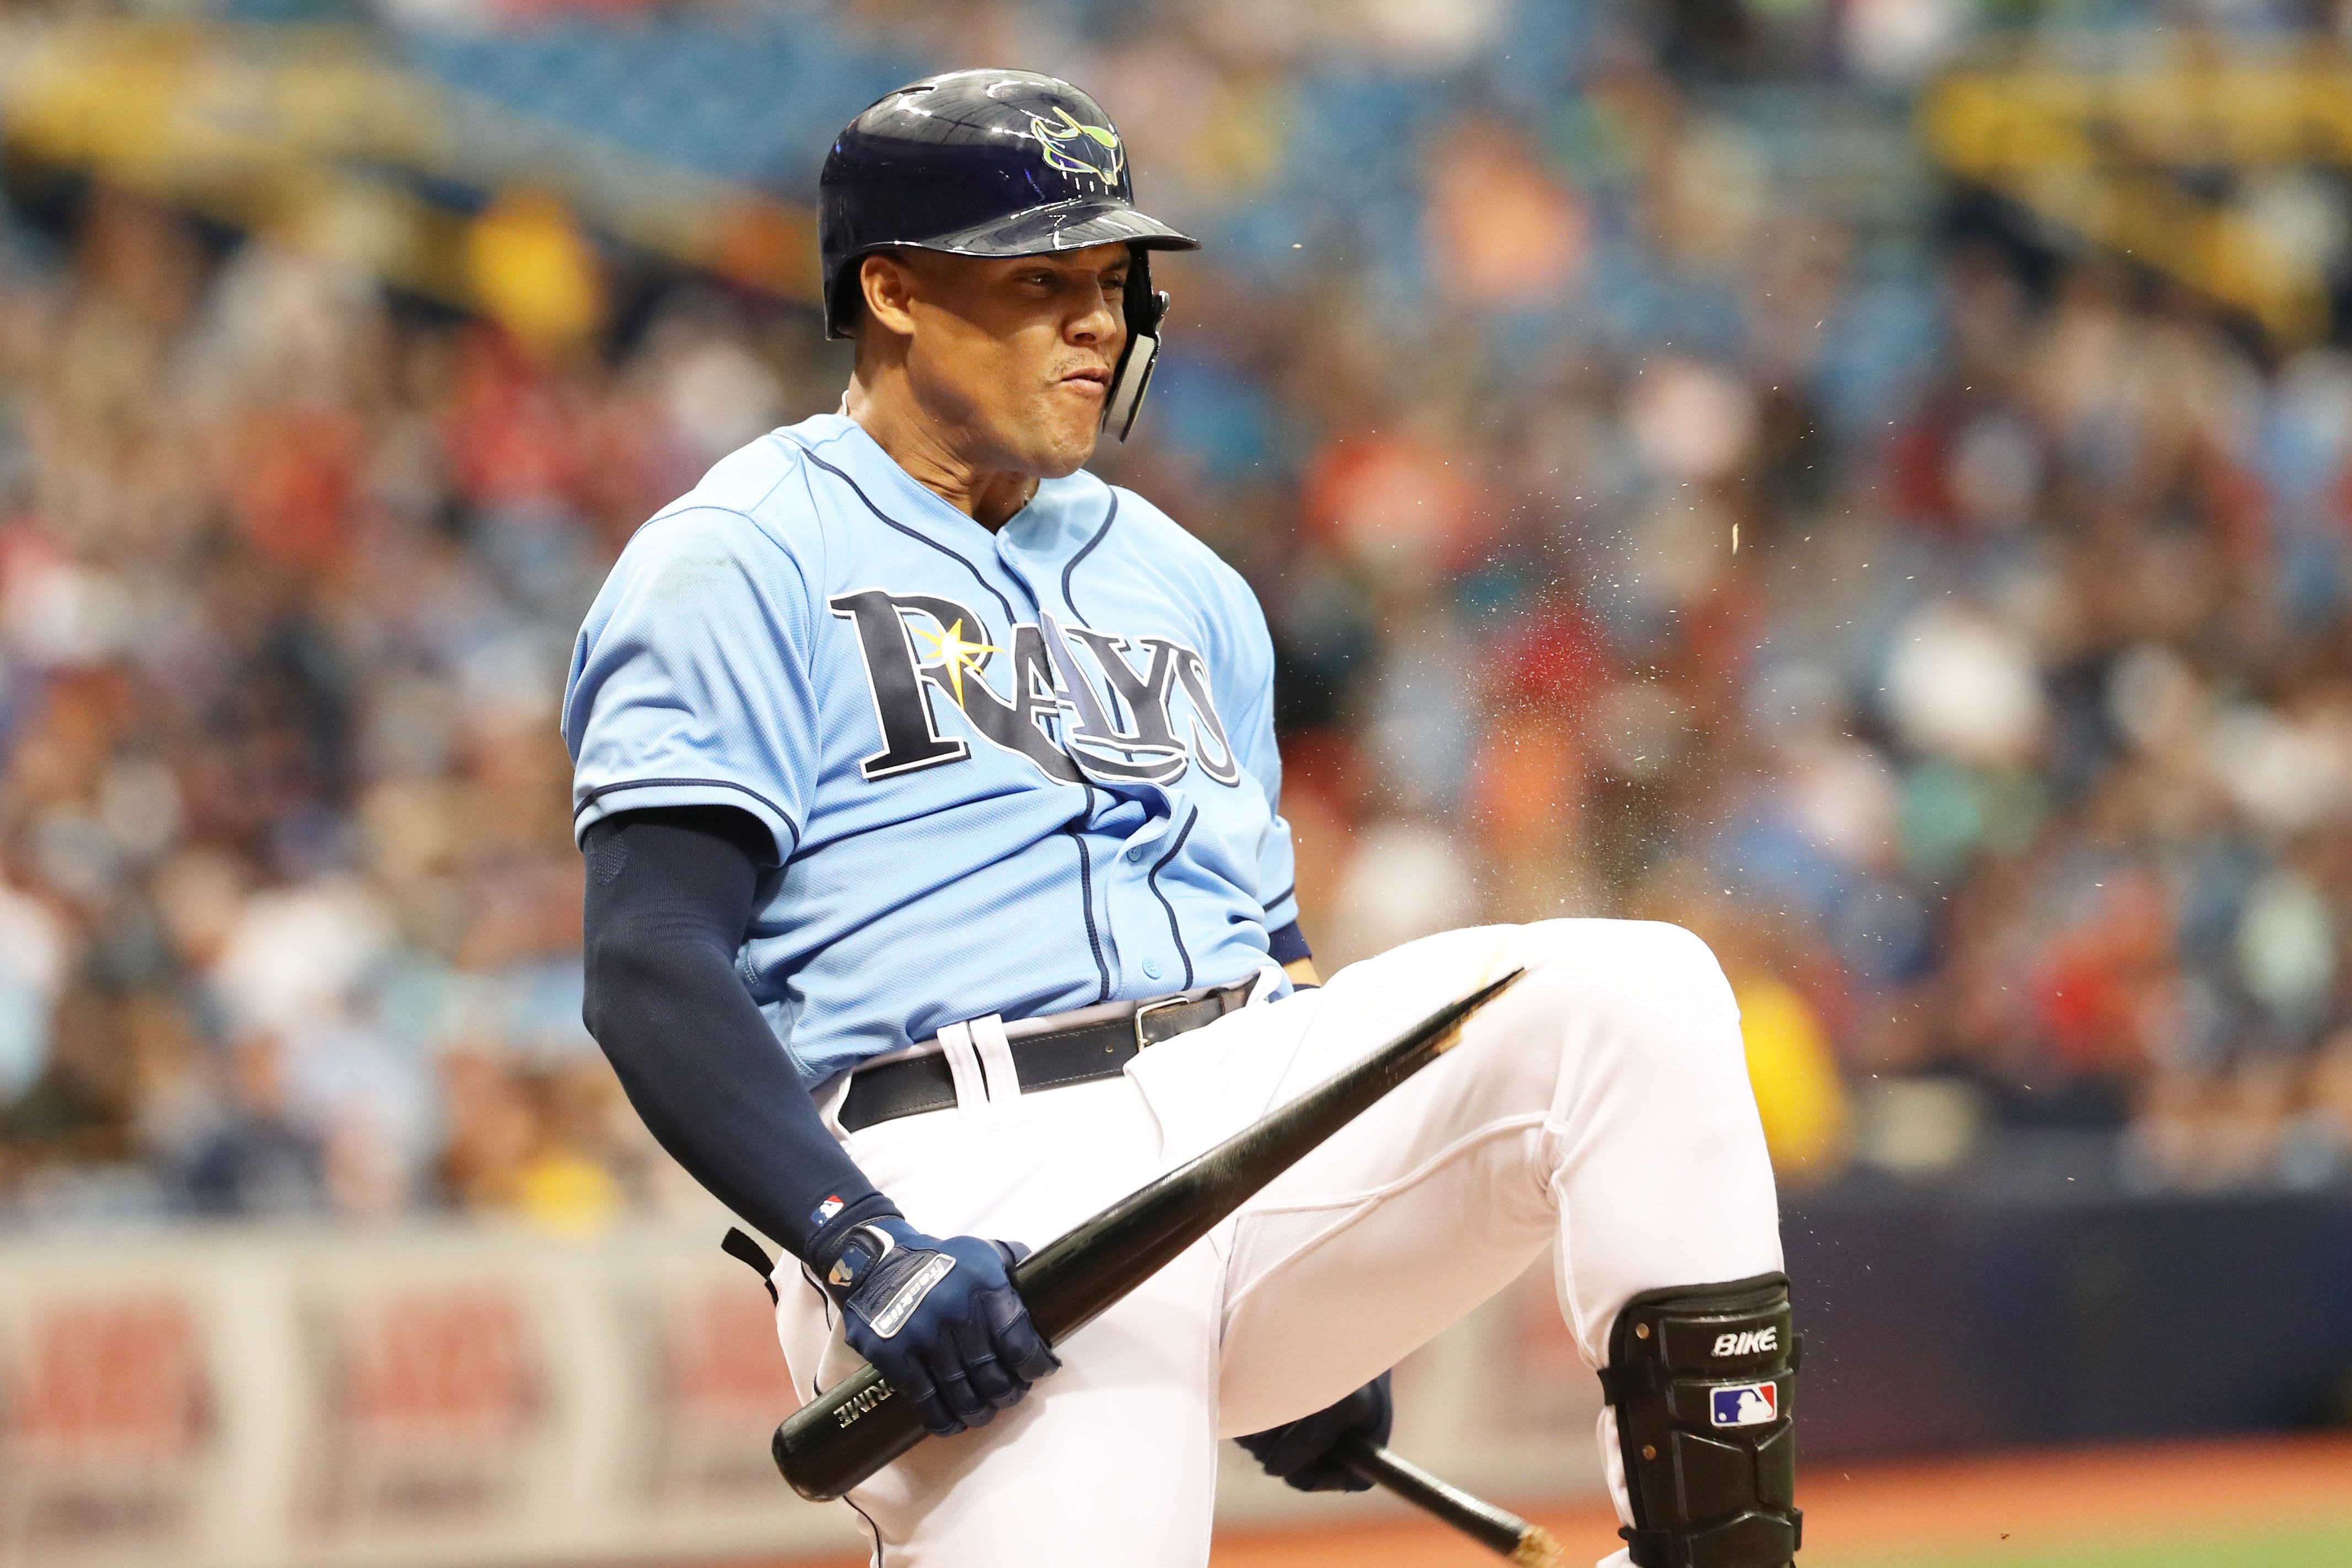 Tampa Bay Rays right fielder Carlos Gomez breaks his bat over his knee after stricking out during the fifth inning against the Minnesota Twins at Tropicana Field in St. Petersburg, Fla.